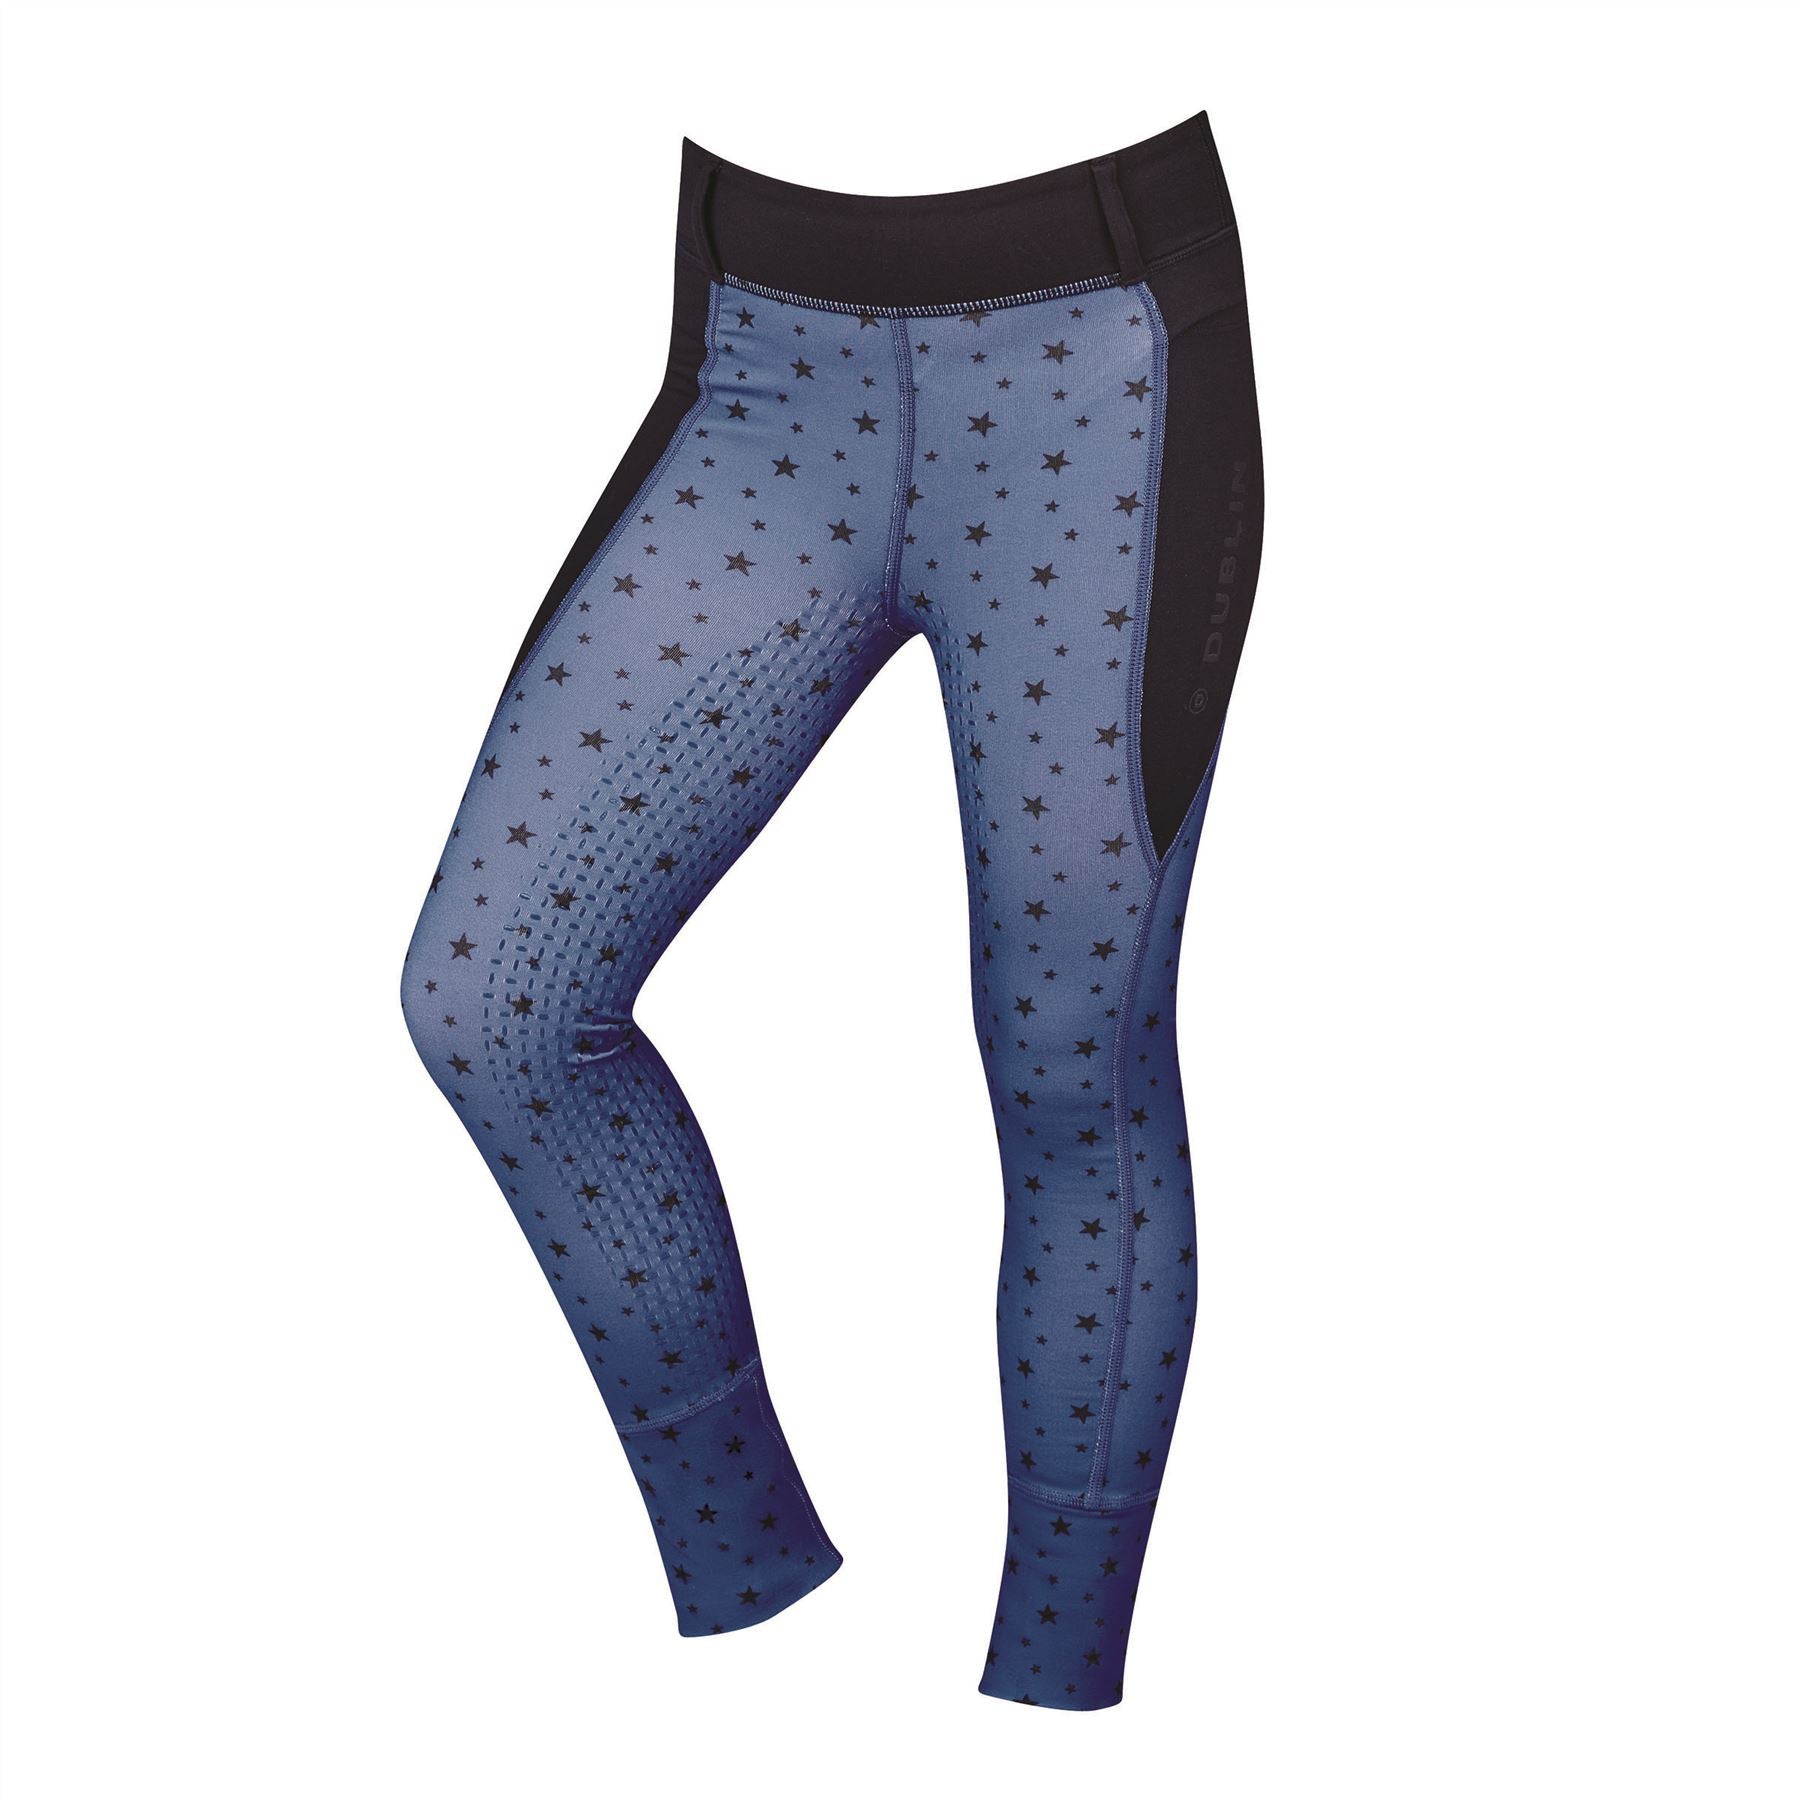 Dublin Printed Cool It Everyday Riding Tights - Just Horse Riders